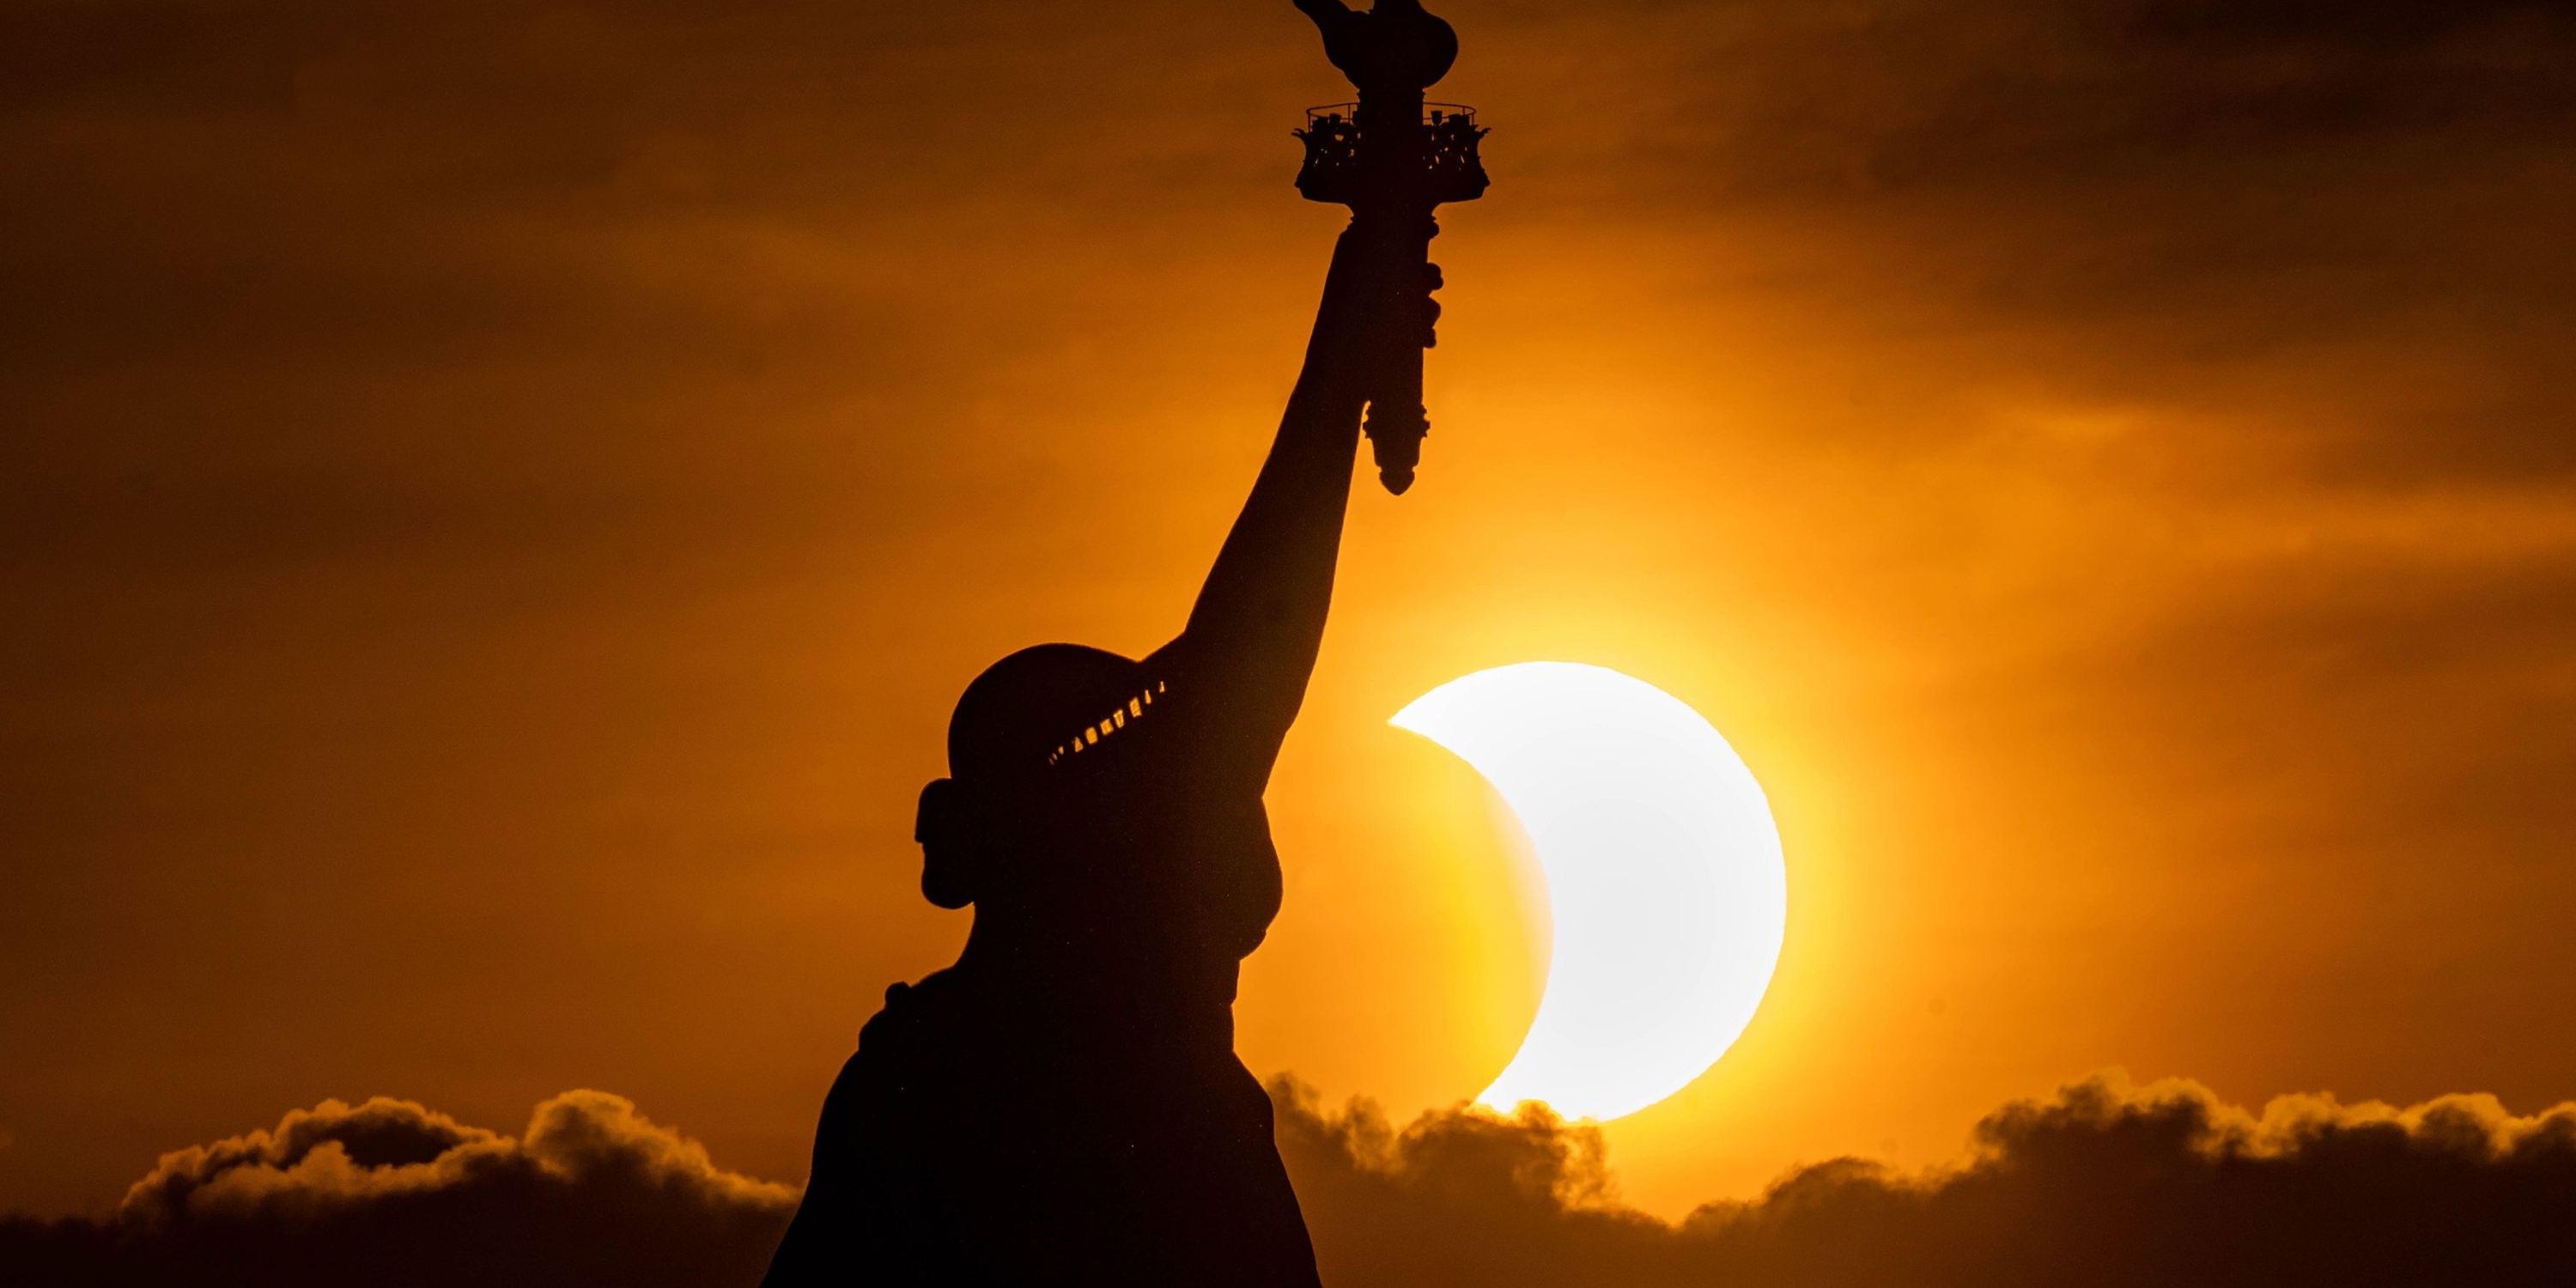 The Statue of Liberty during the June 10, 2021 solar eclipse.